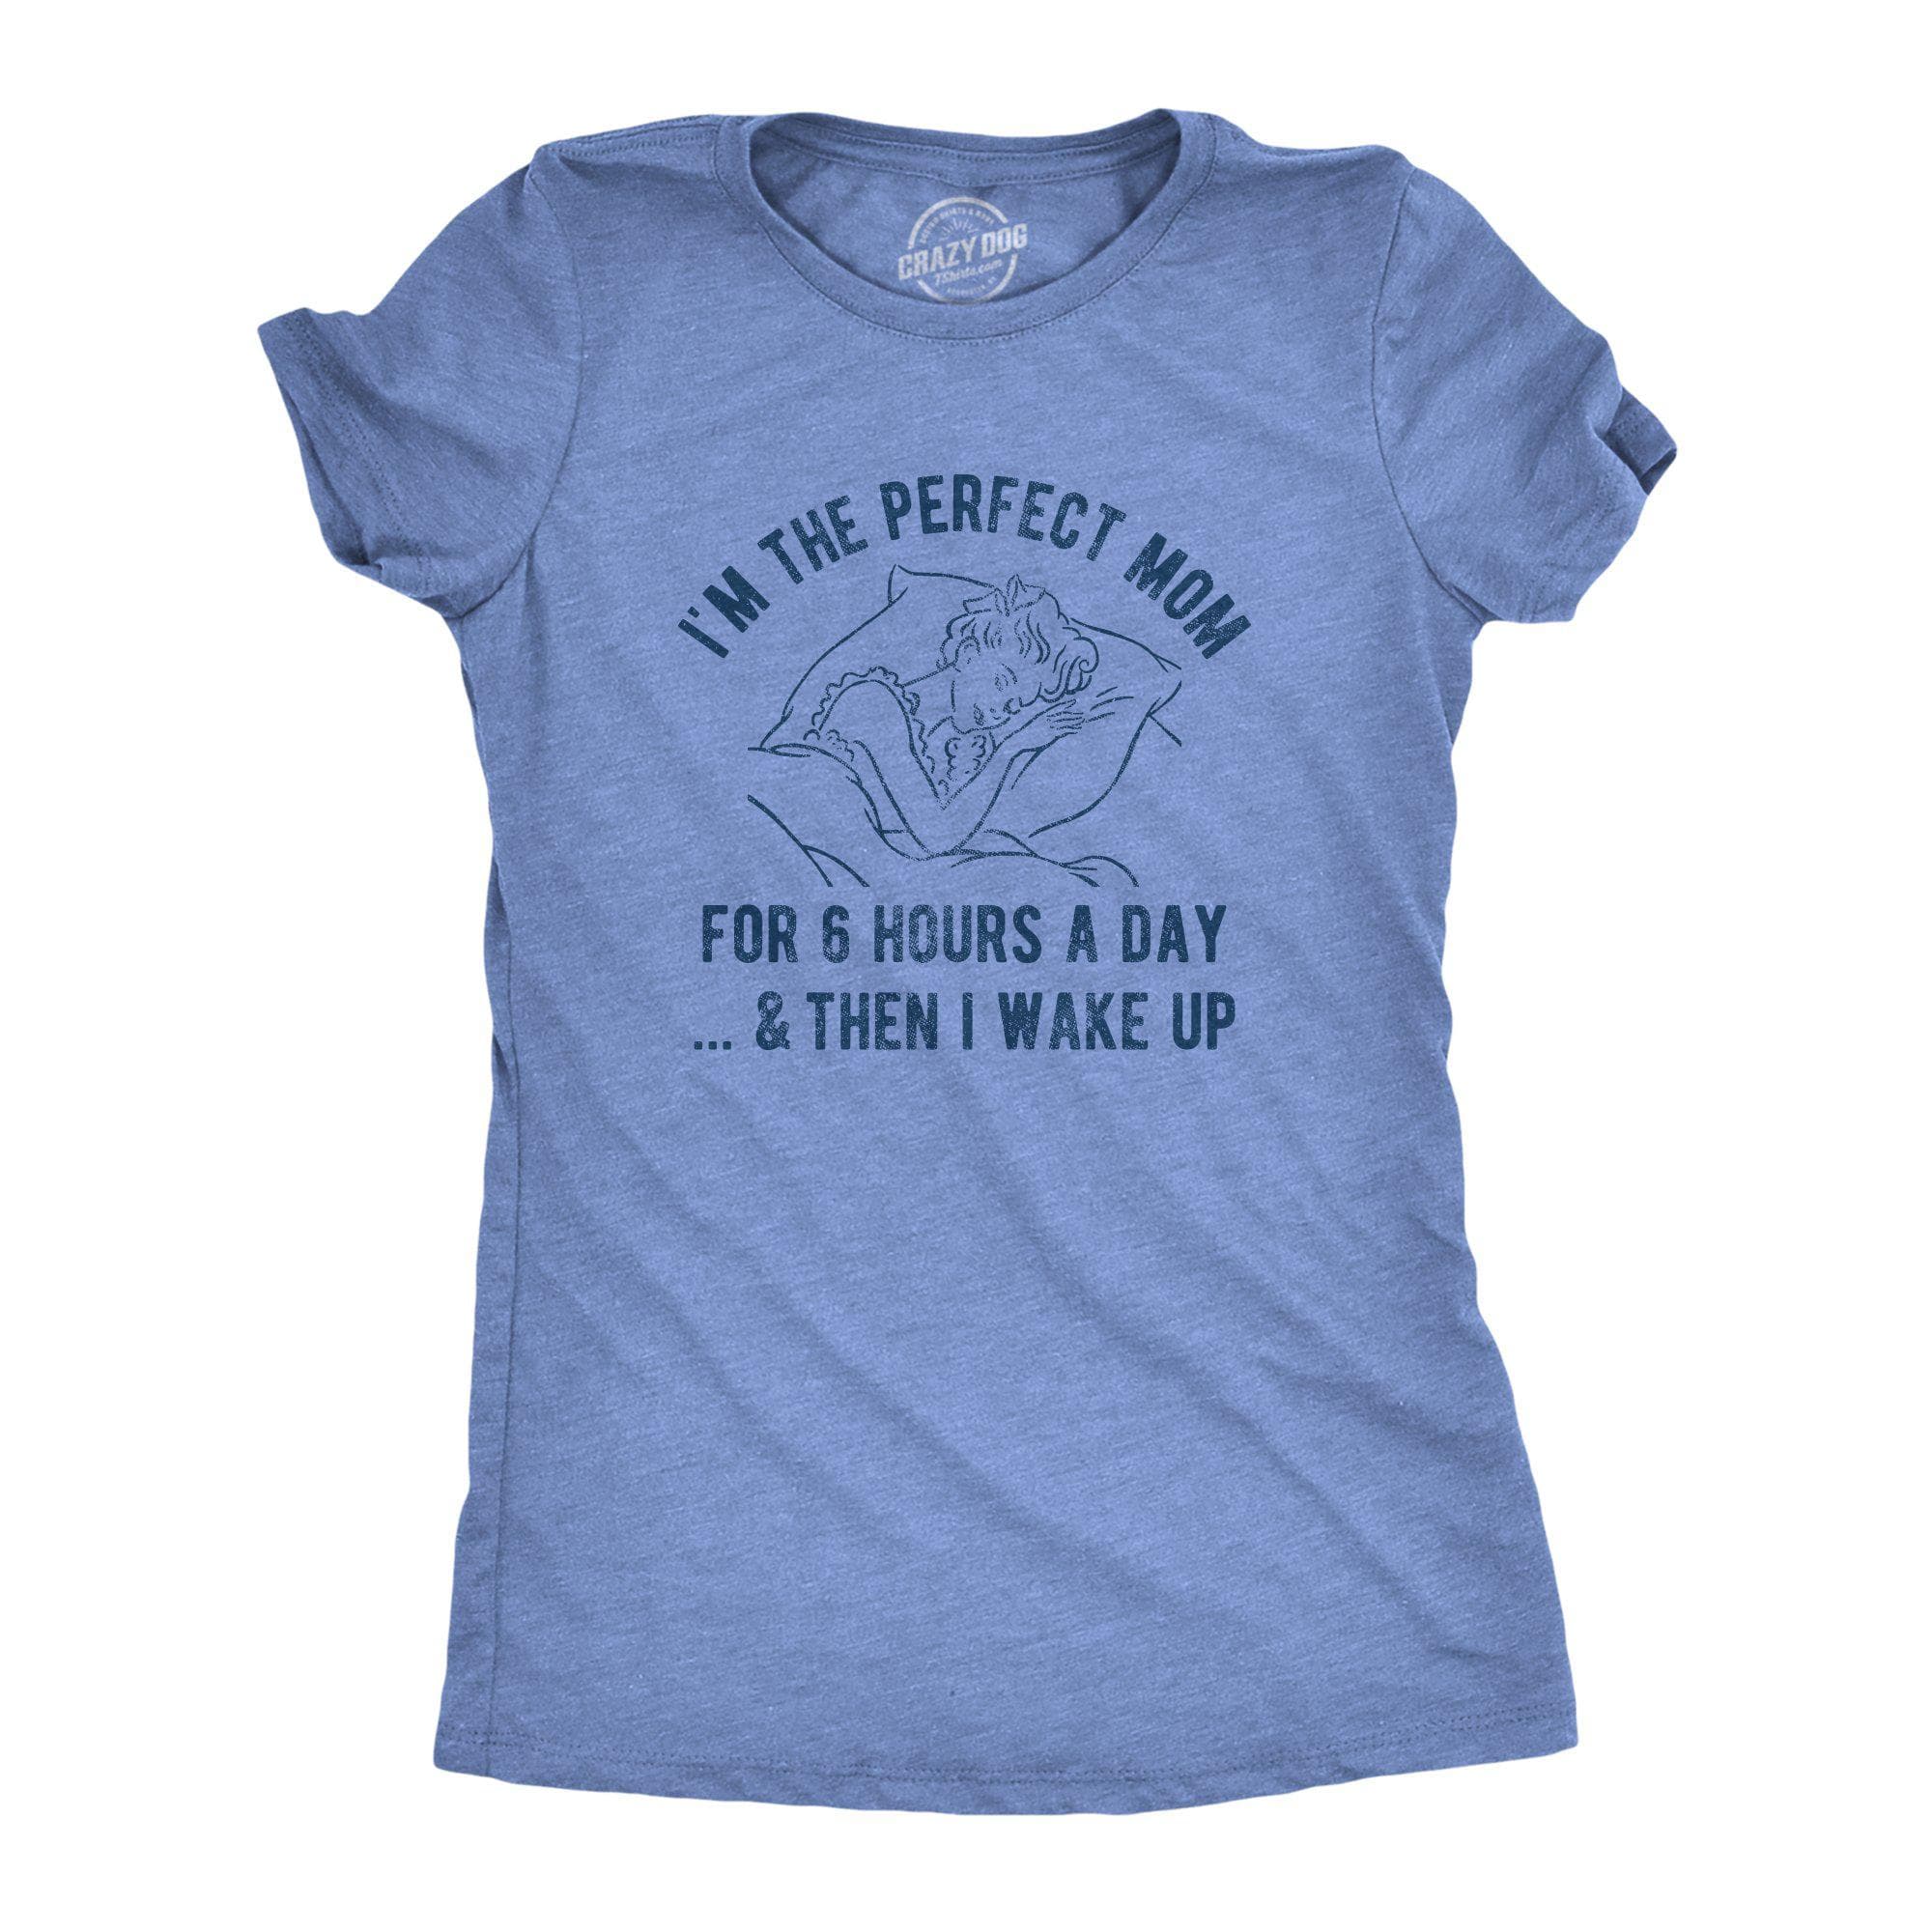 I'm The Perfect Mom For 6 Hours A Day And Then I Wake Up Women's Tshirt - Crazy Dog T-Shirts